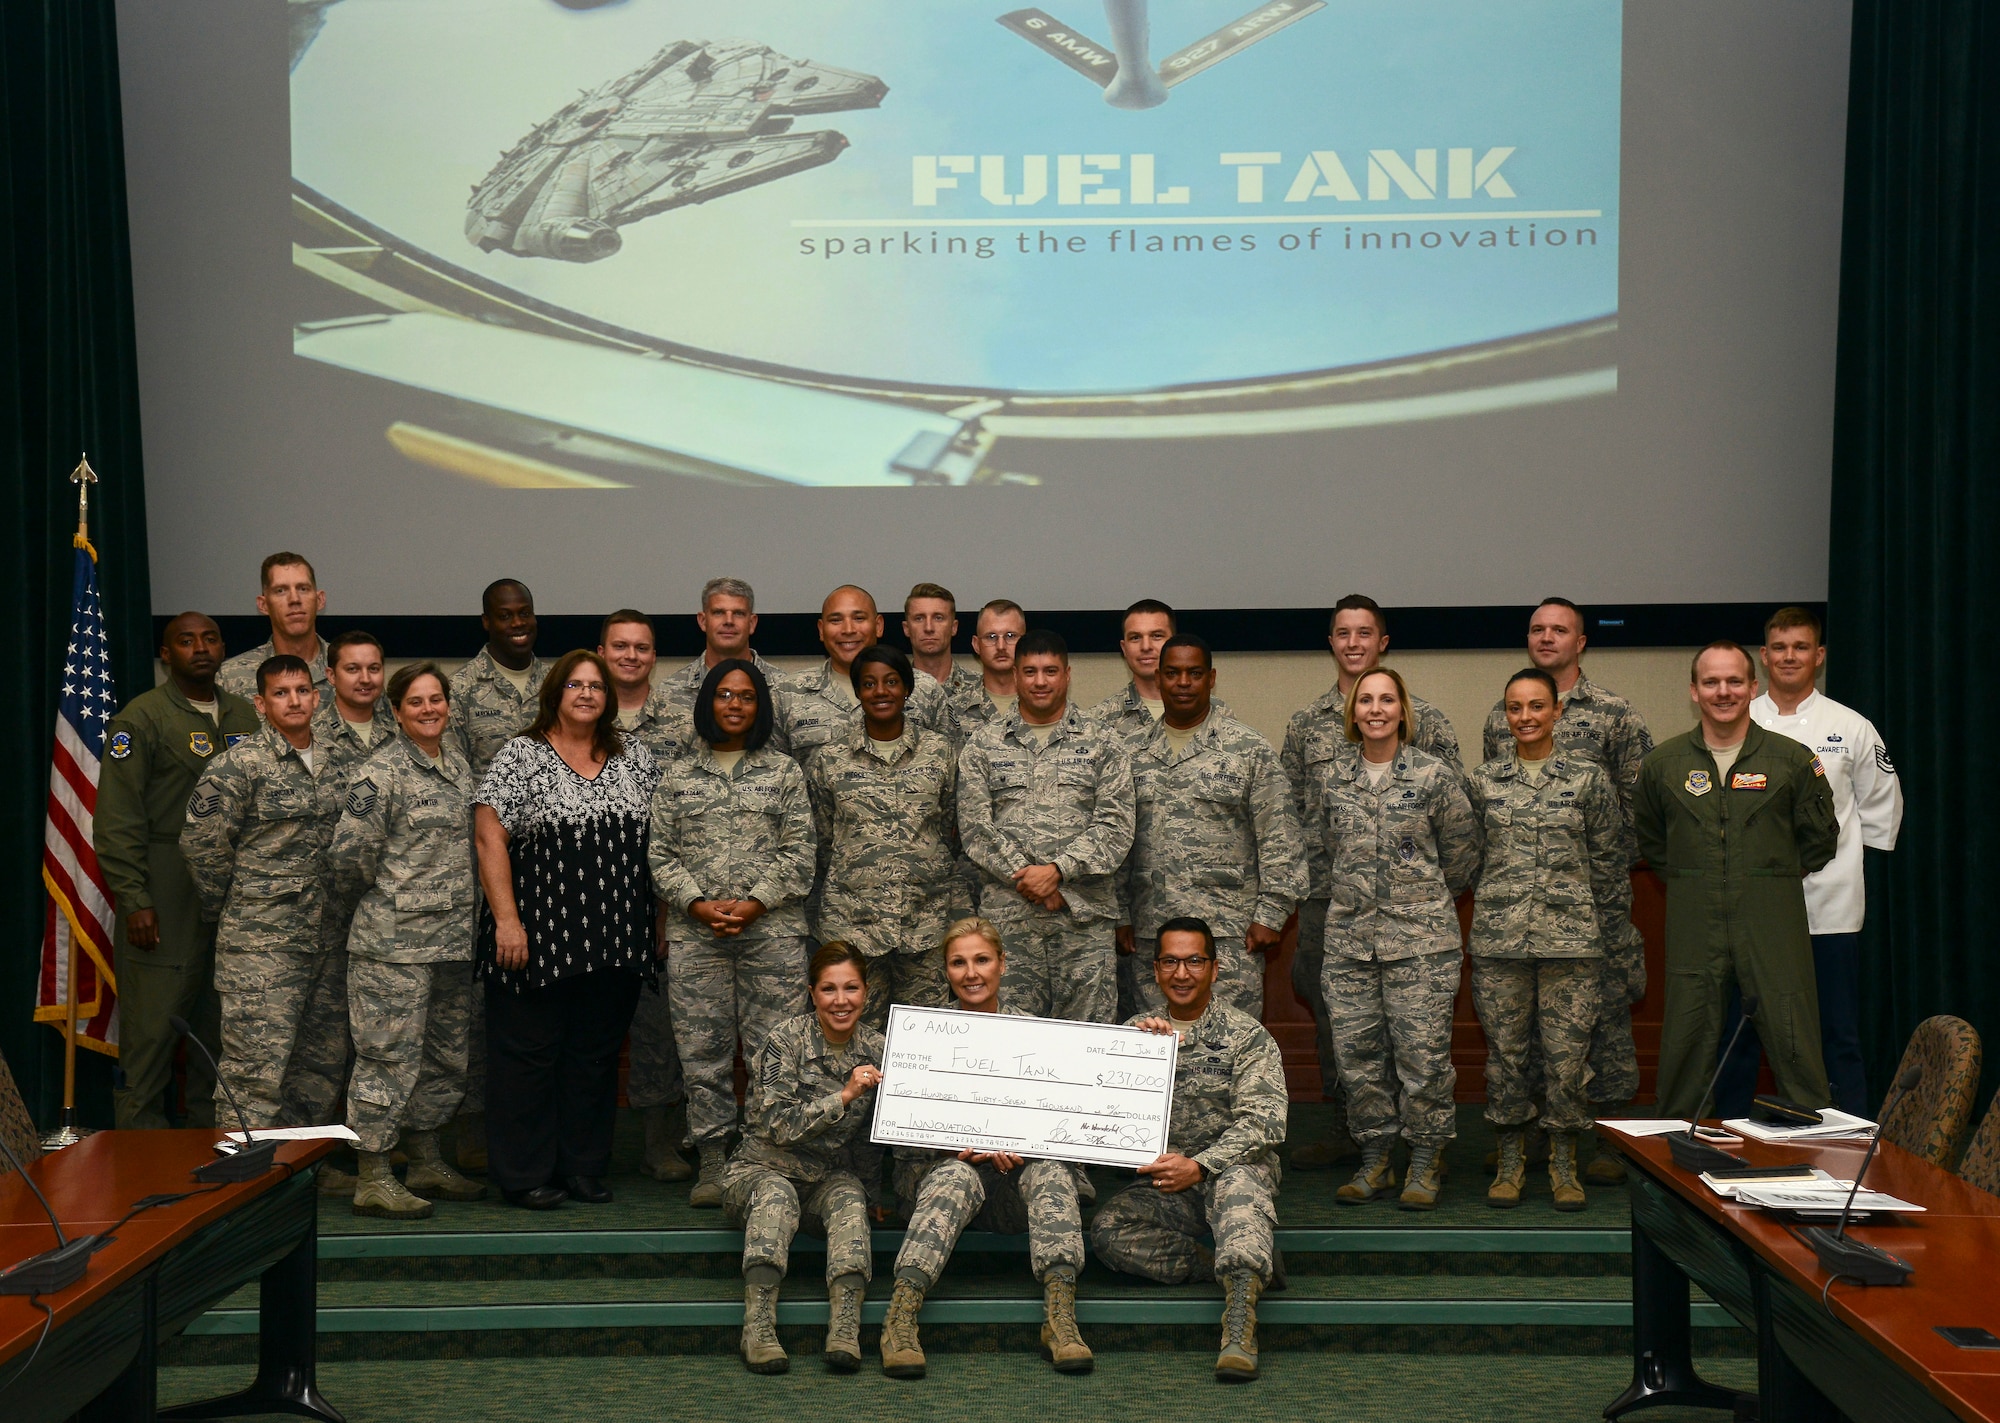 MacDill Fuel Tank presenters, judges and coordinators pause for a group photo after awarding $237,000 to ten innovative ideas at MacDill Air Force Base, Fla., June, 27, 2018.